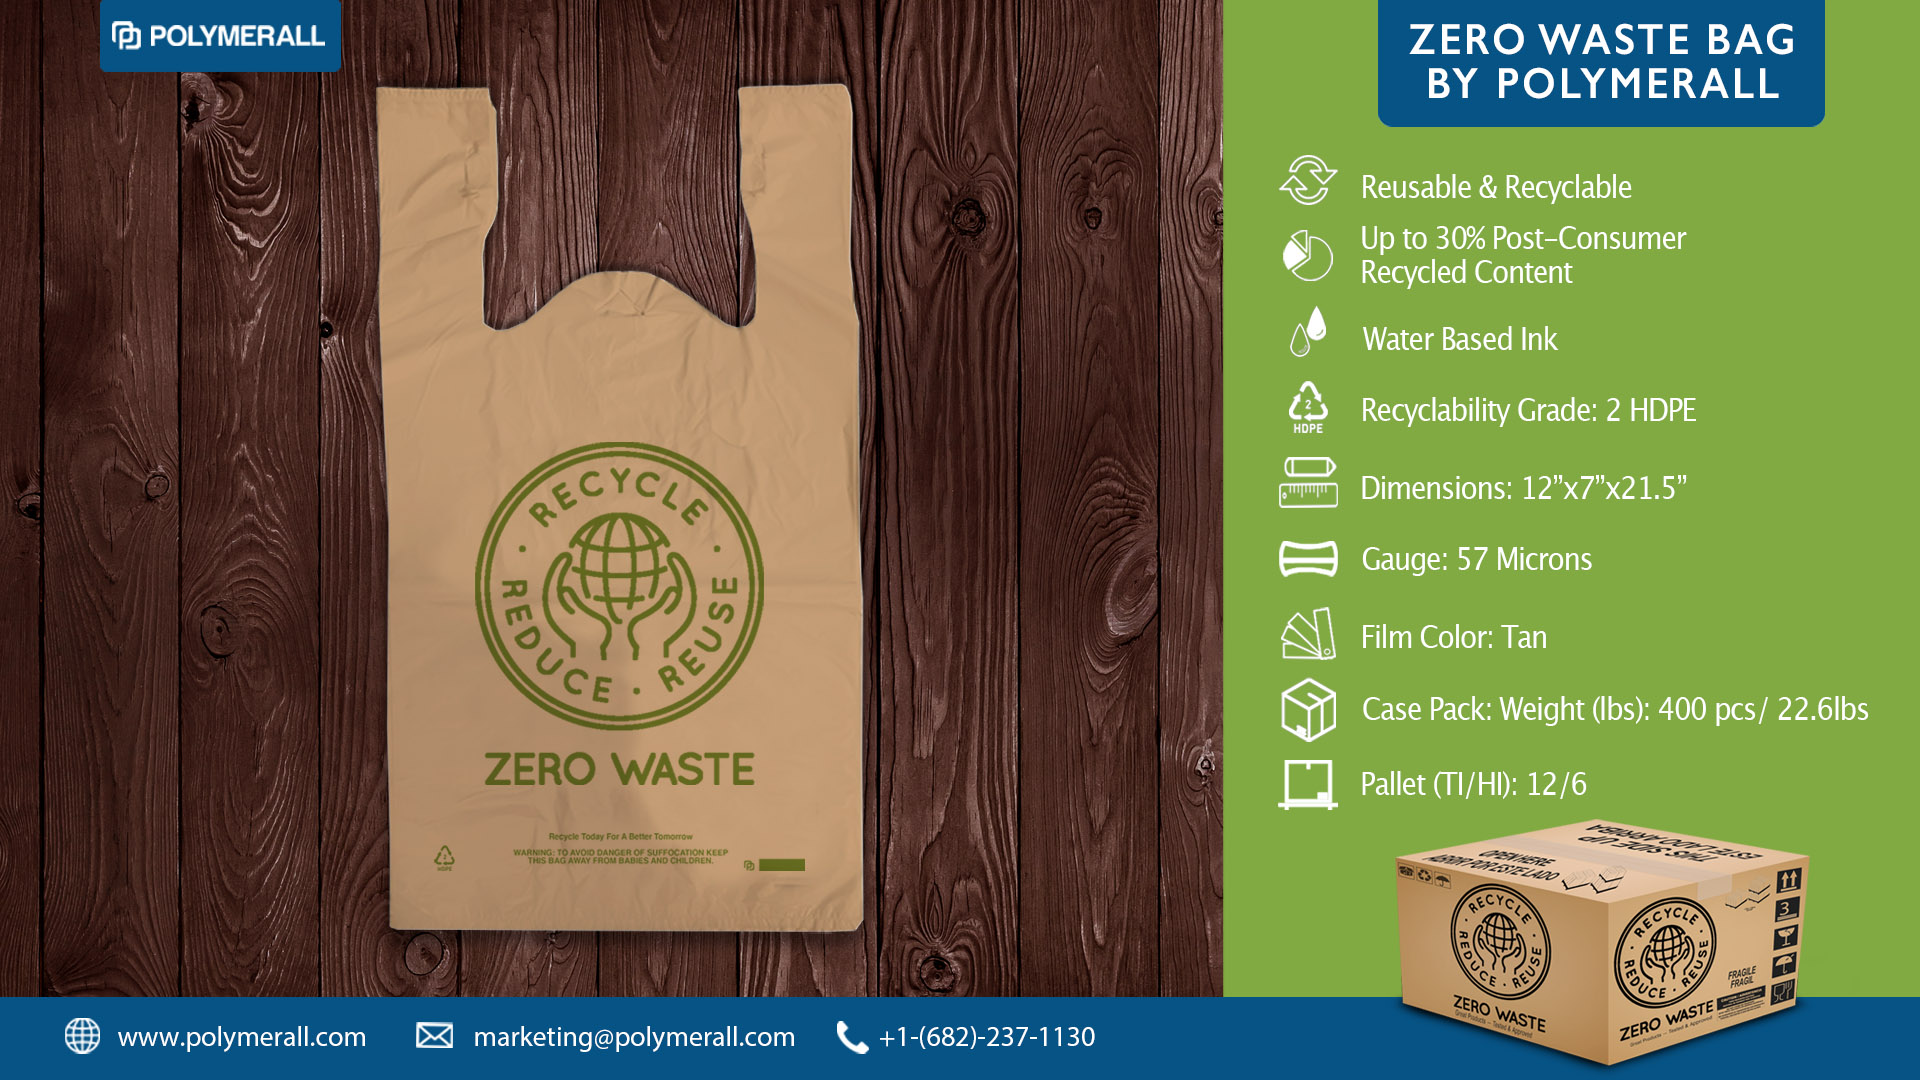 Introducing the Polymerall Zero Waste Bag - Polymerall Flexible Packaging